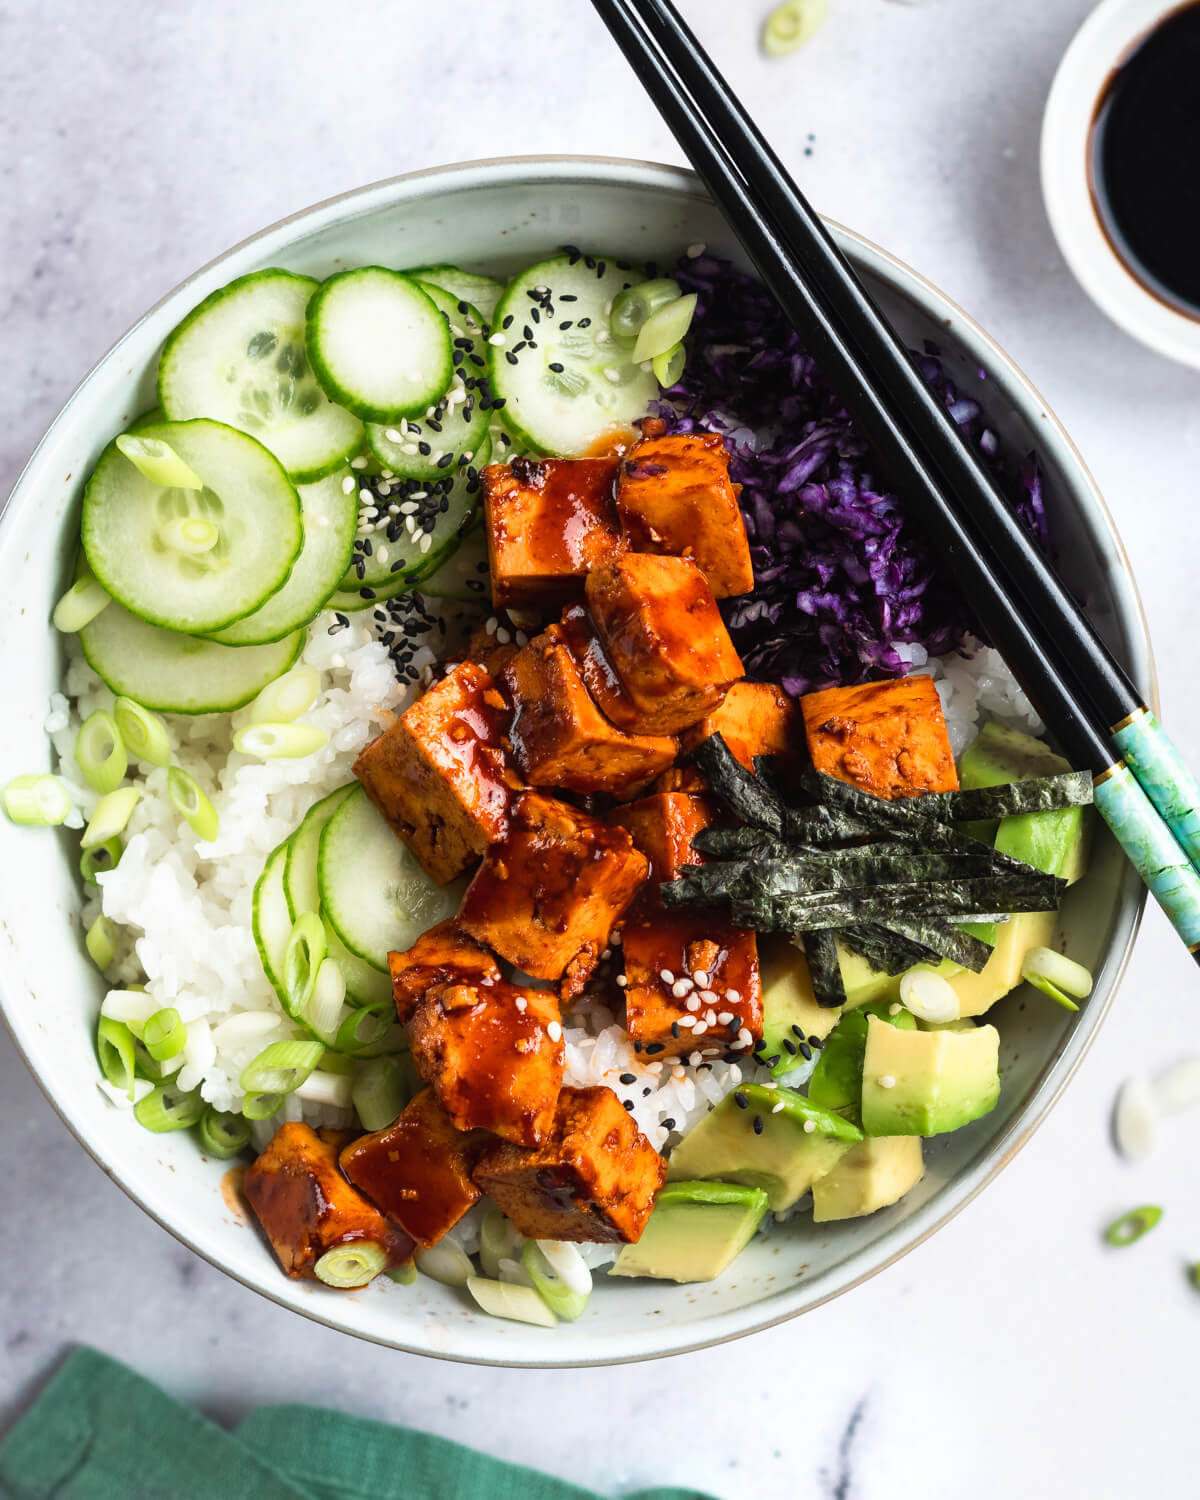 A poke bowl with sticky sweet and spicy tofu and vegetables